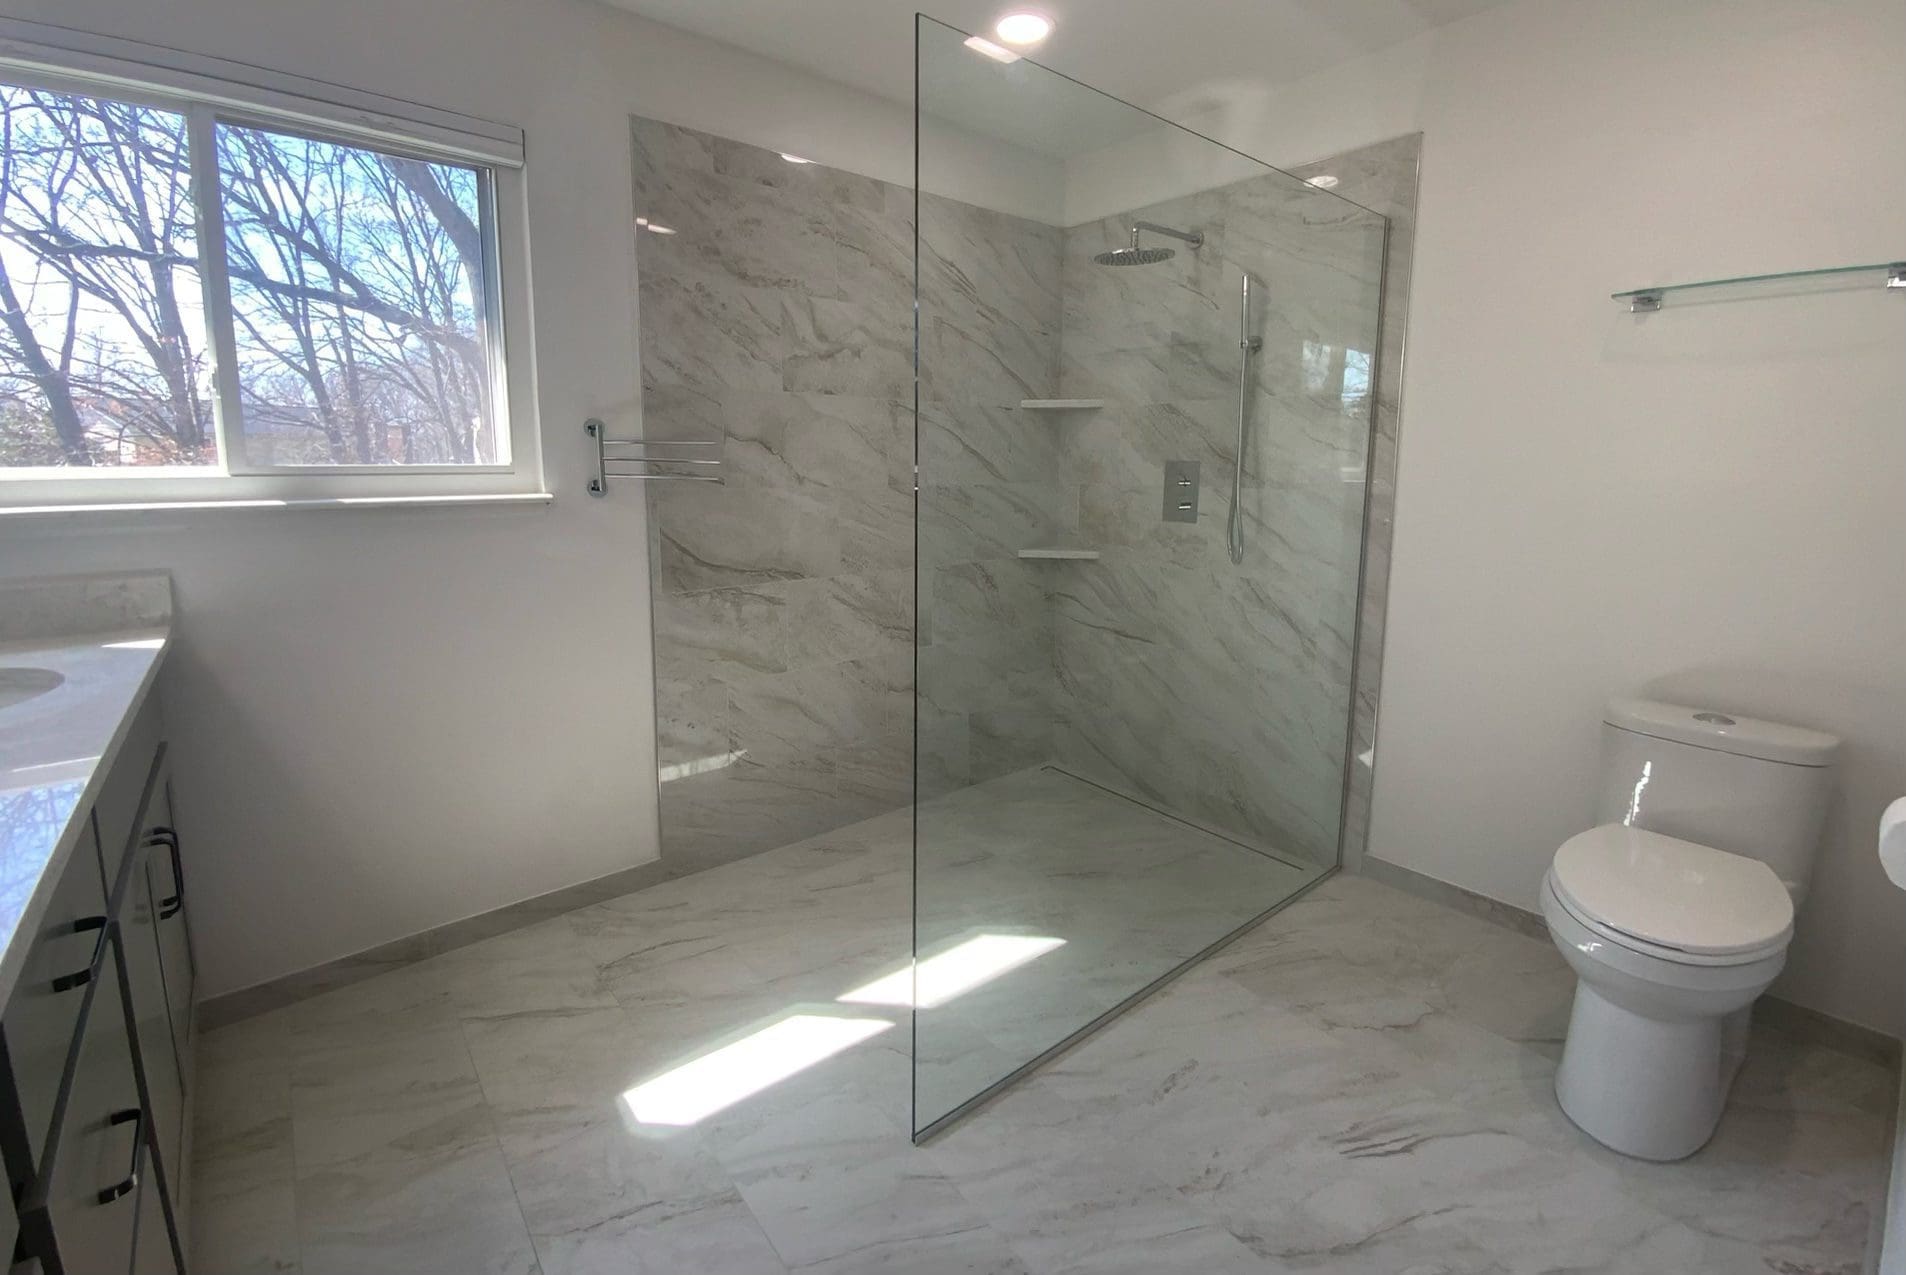 A curbless shower, with white tile and chrome hardware.